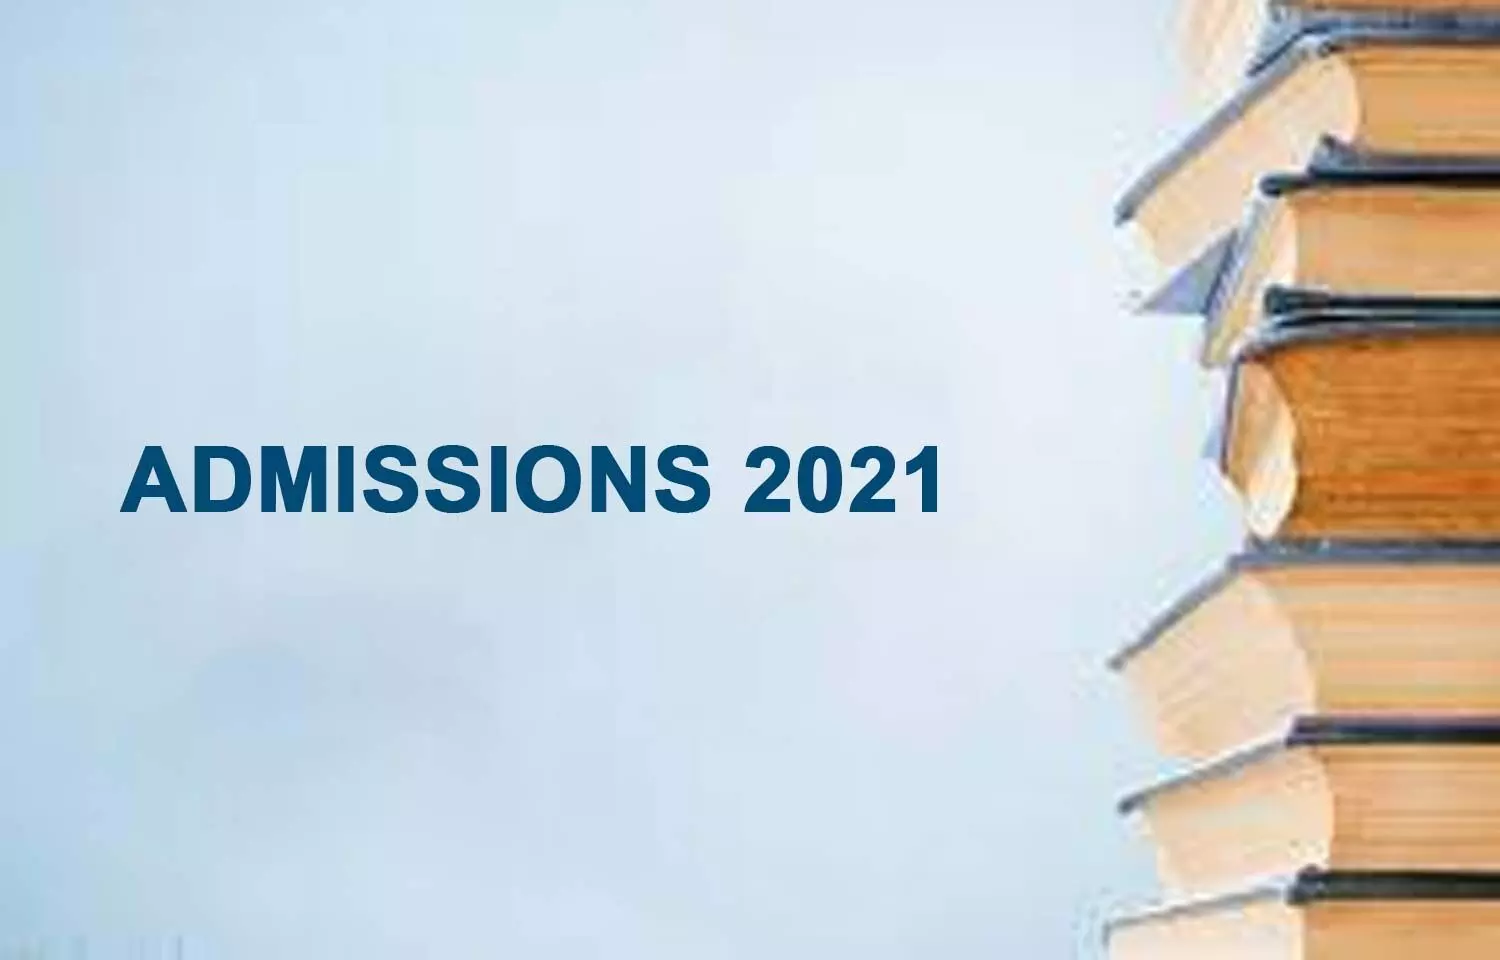 AIIMS changes DM Radiation Oncology subject name for INICET PG Medical Admissions 2021